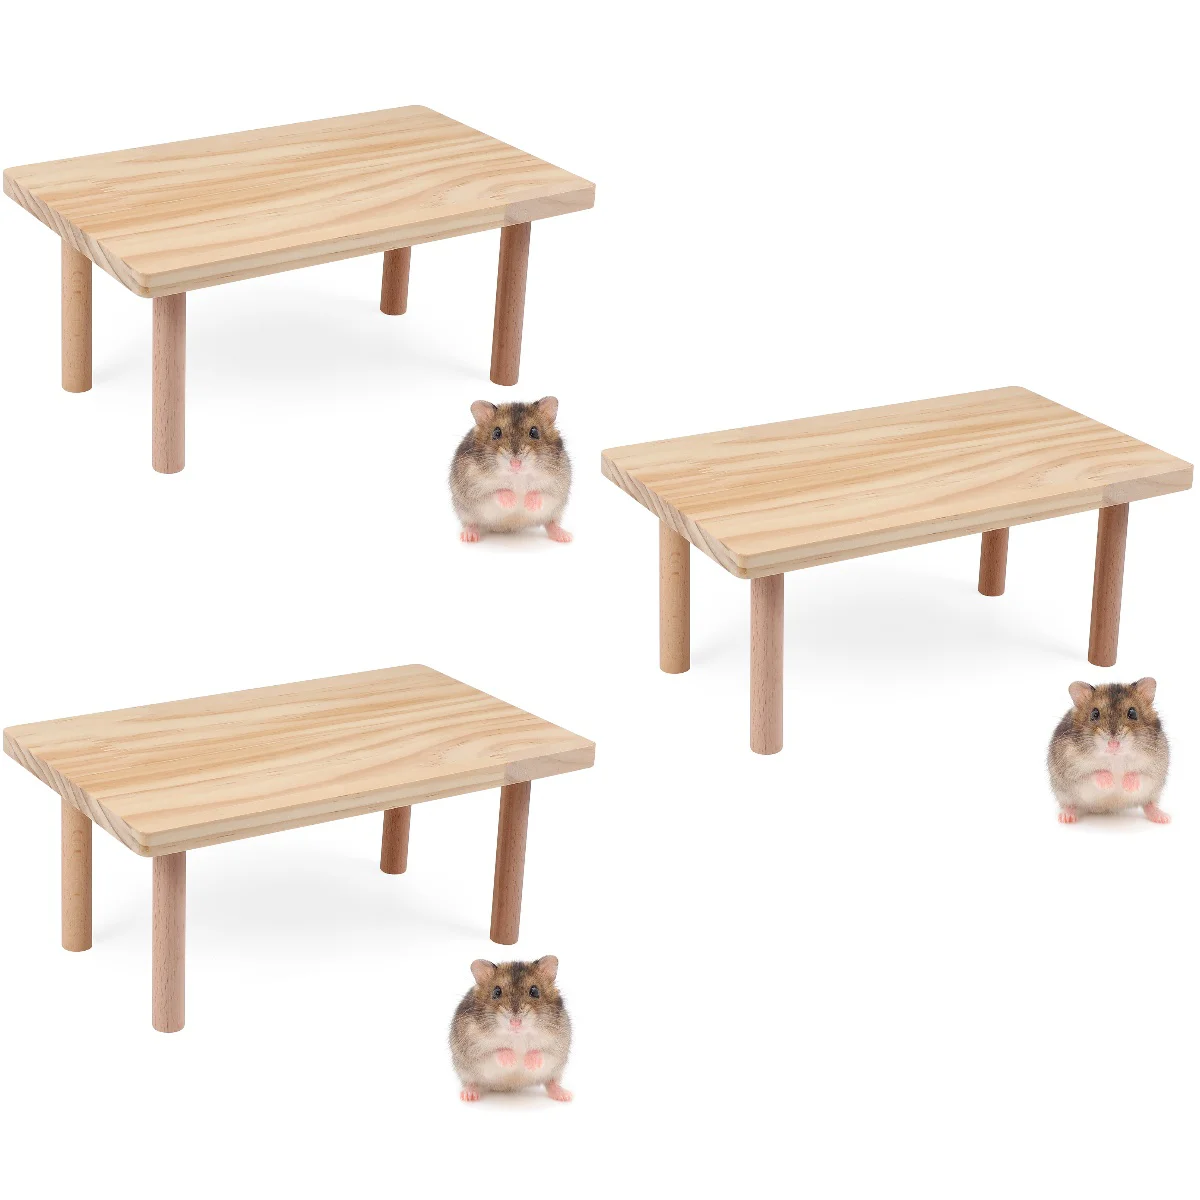 

3pcs Hamster Play Wooden Platform Small Pet Playing Stand Putting Food Bowl Water Table Cage Accessory